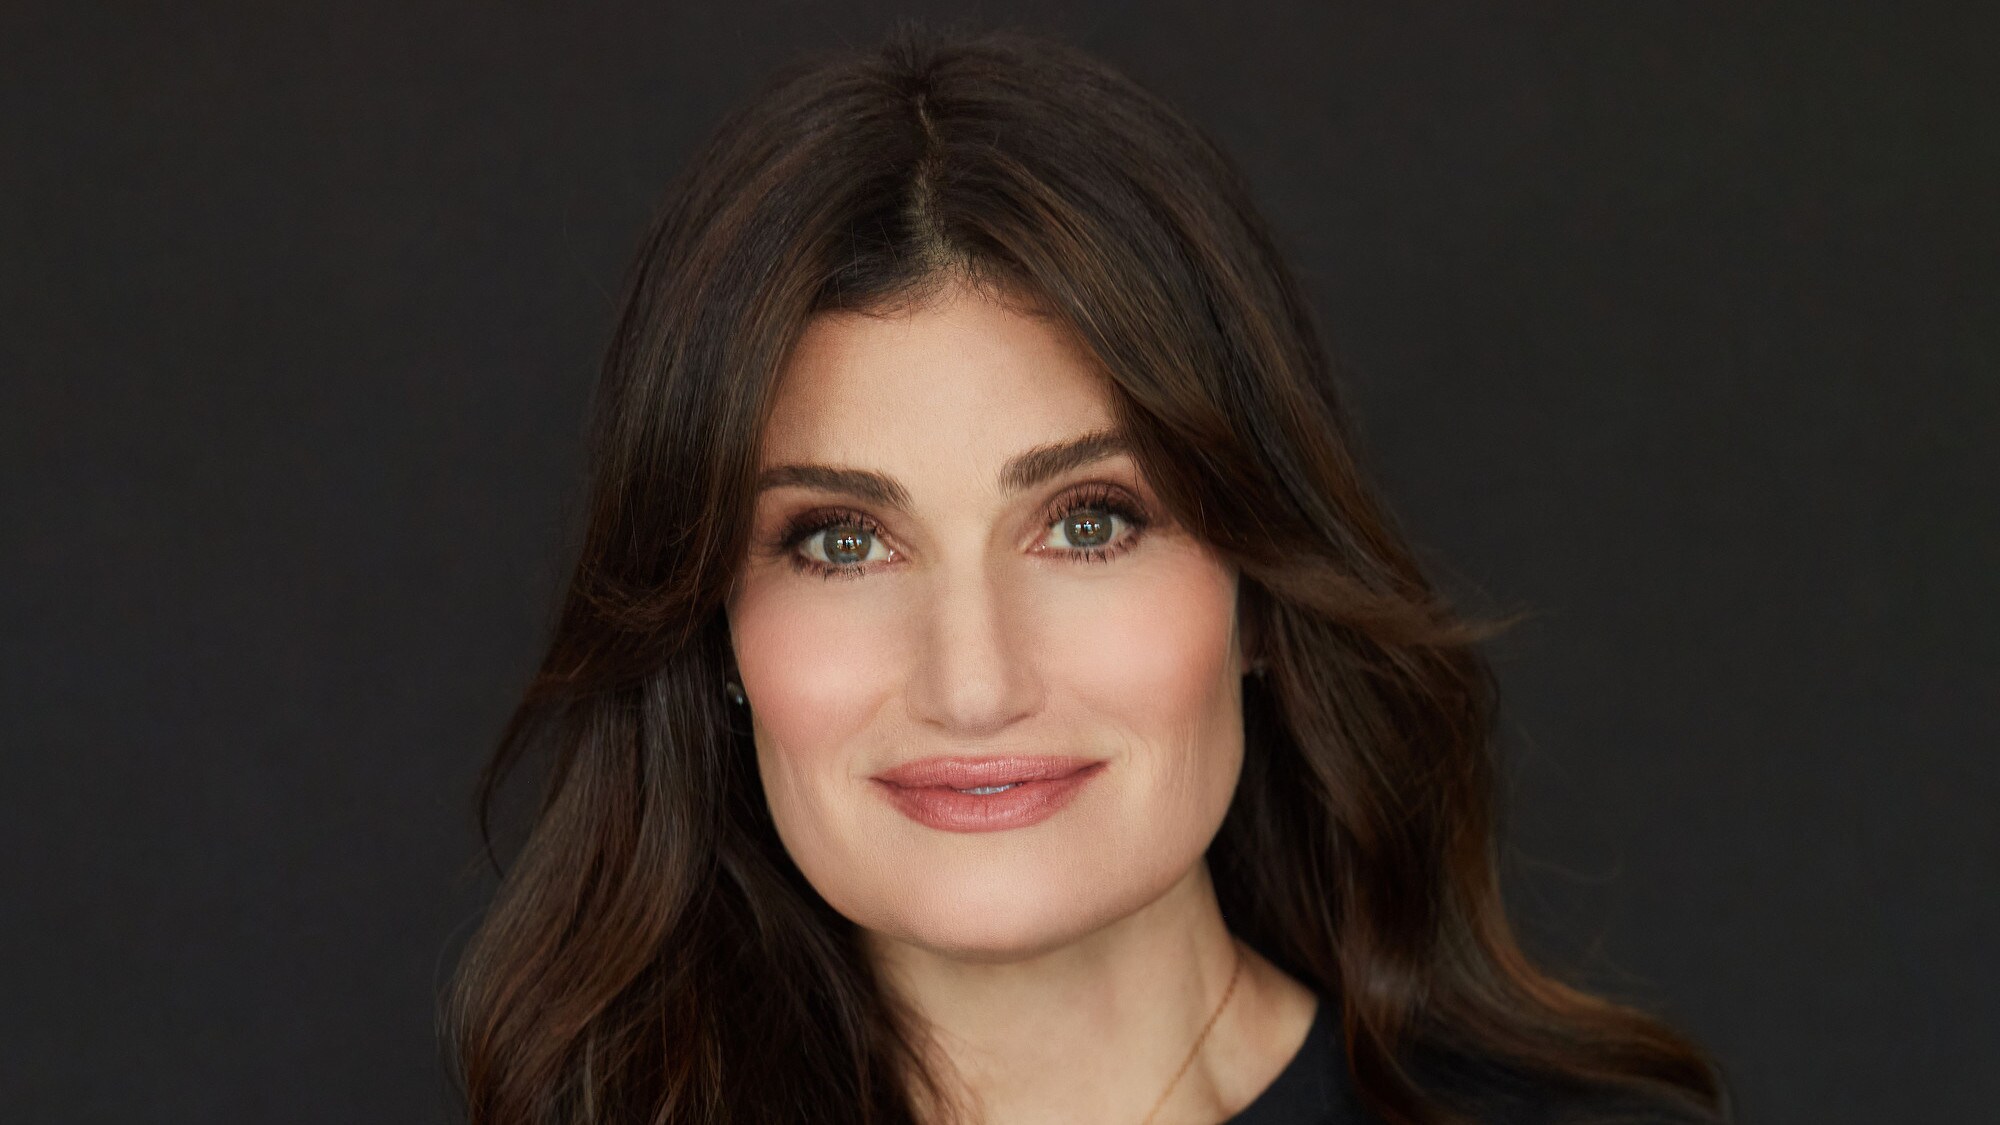 Tony Award®-Winning Actress And Singer Idina Menzel Takes Audiences On An Intimate Journey Into Her Life On And Off The Stage In New Disney+ Documentary ‘Idina Menzel: Which Way To The Stage?’